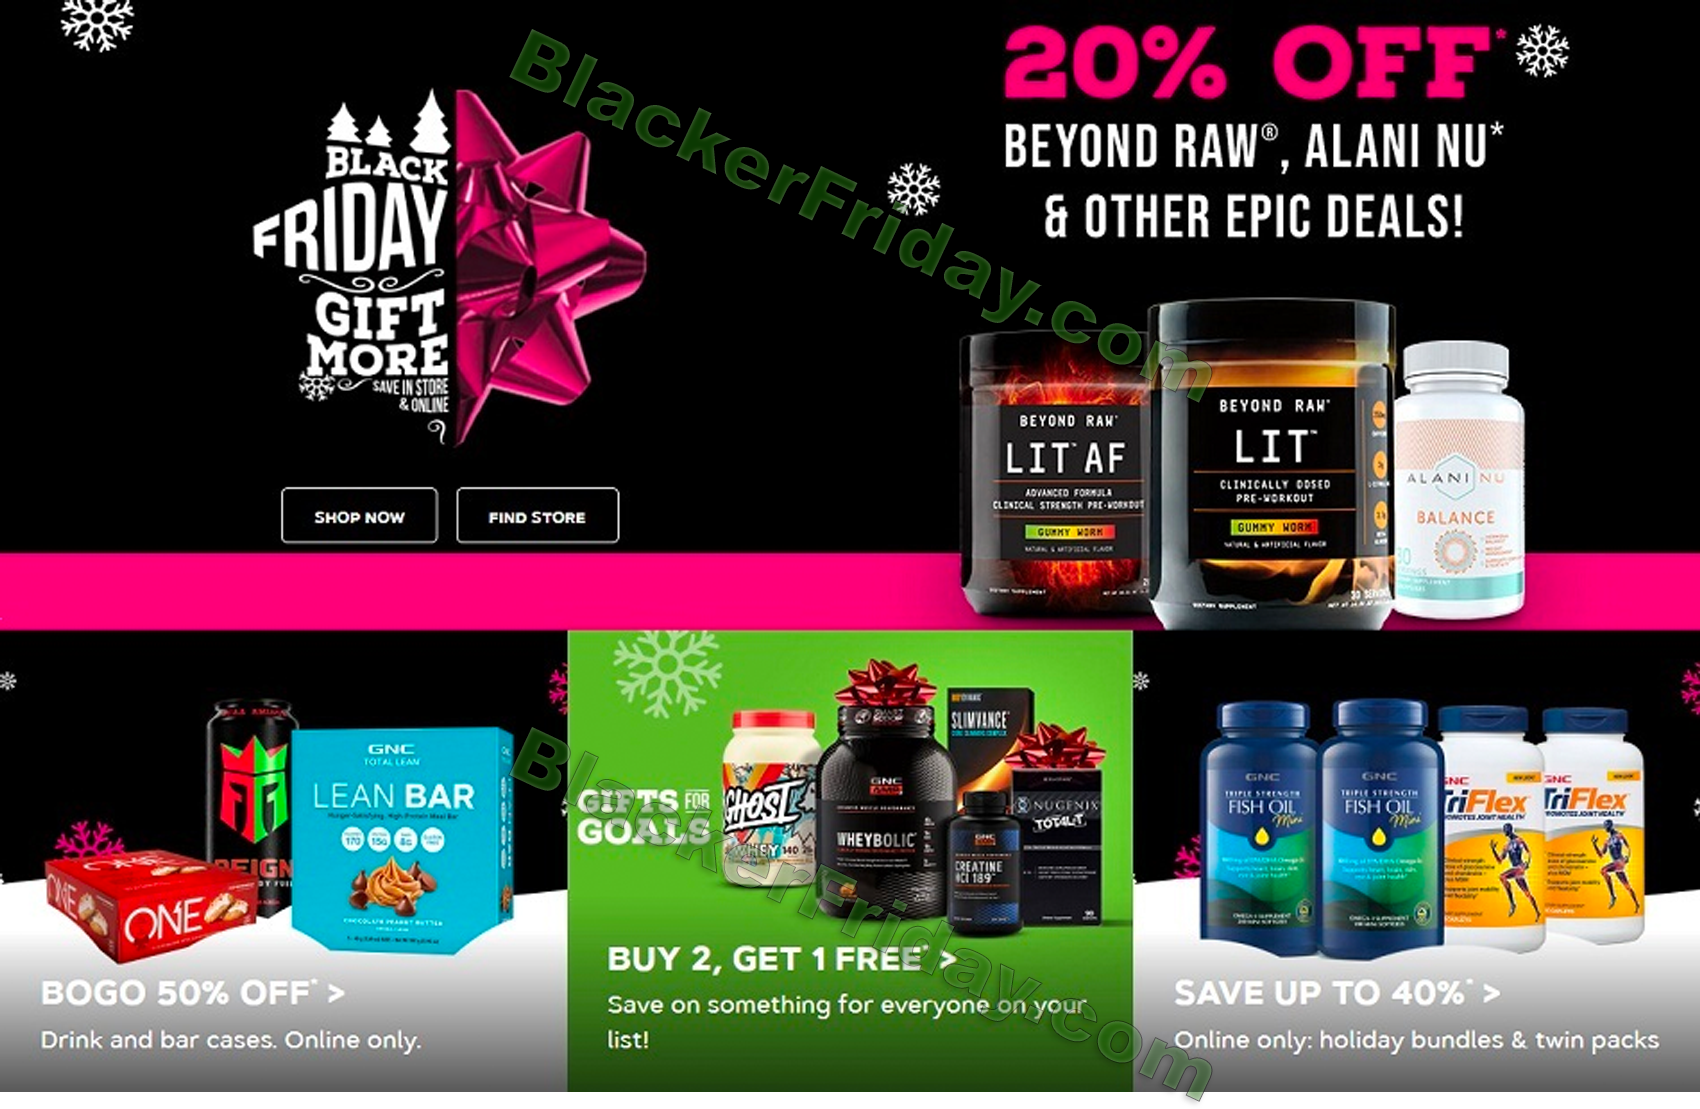 GNC Black Friday 2020 Sale - What to Expect - Blacker Friday - What Kind Of Sales Can I Expect On Black Friday